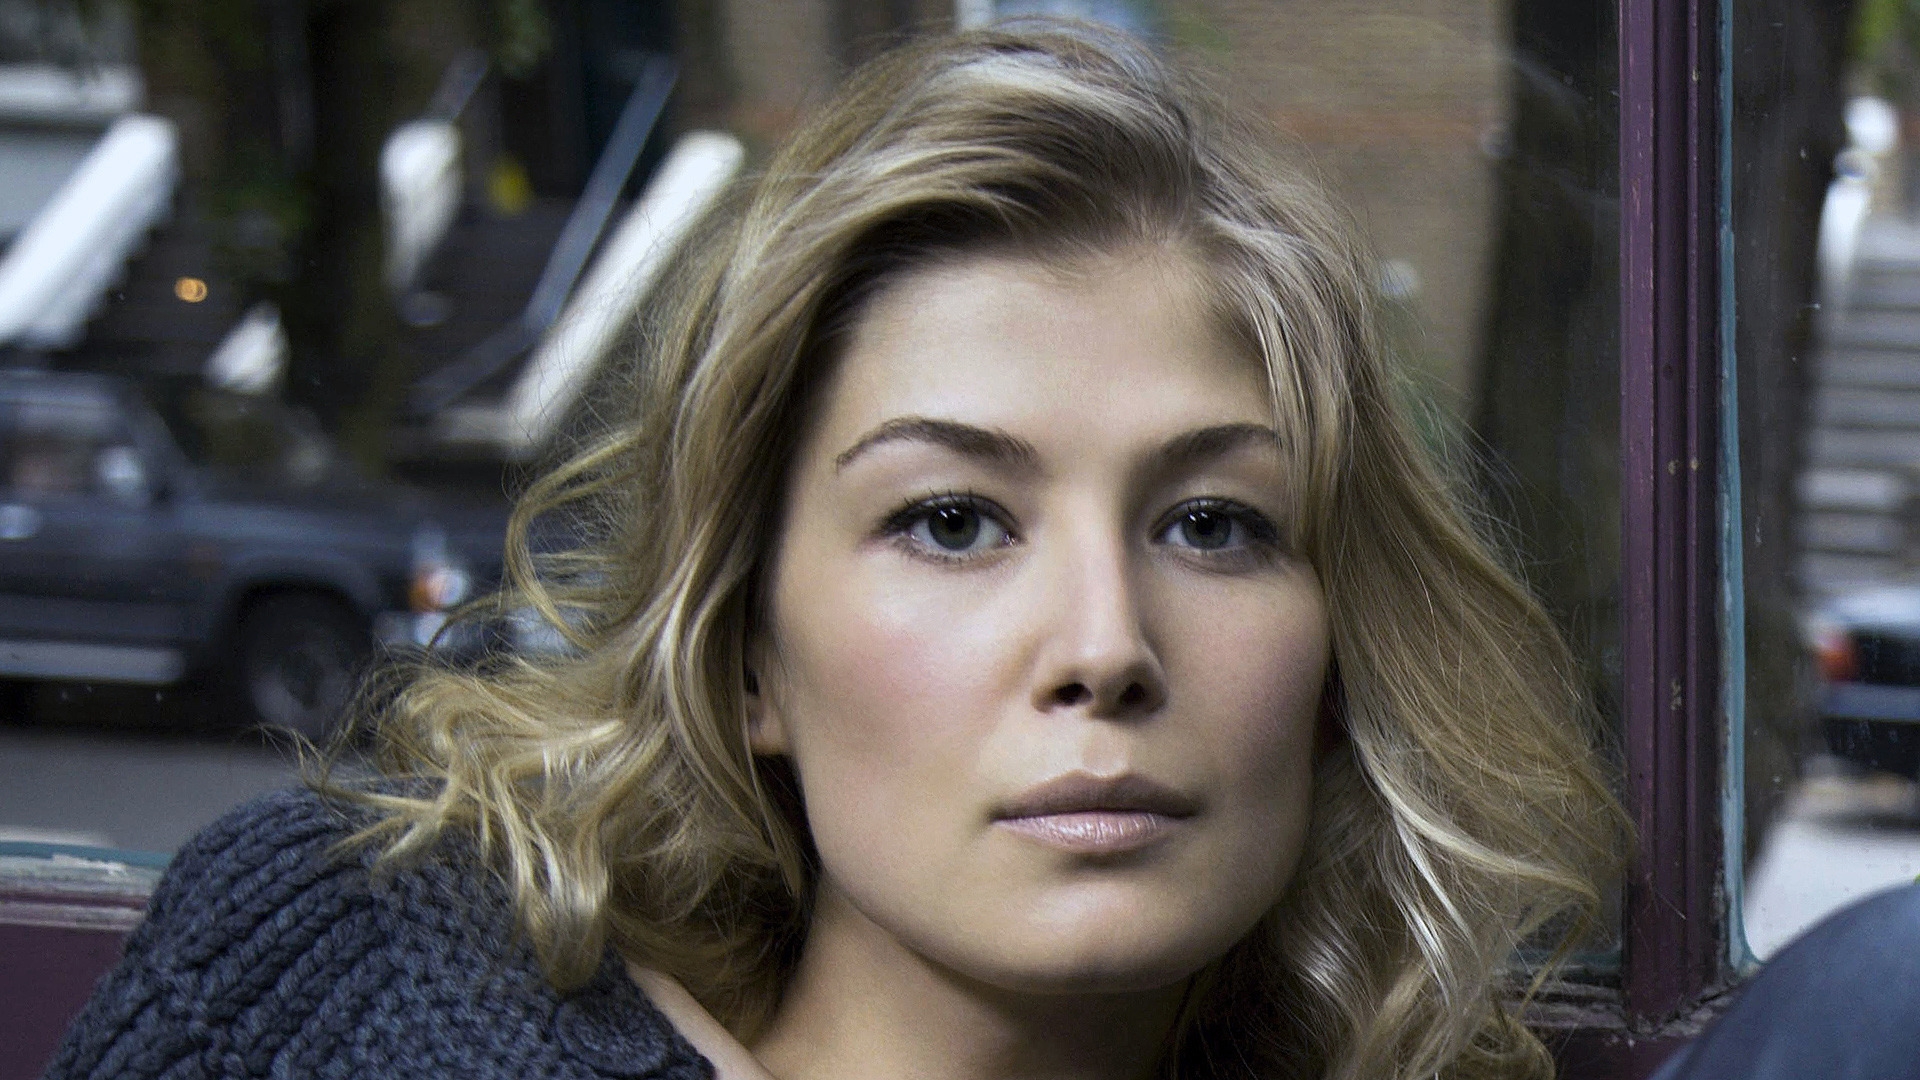 Rosamund Pike Look for 1920 x 1080 HDTV 1080p resolution